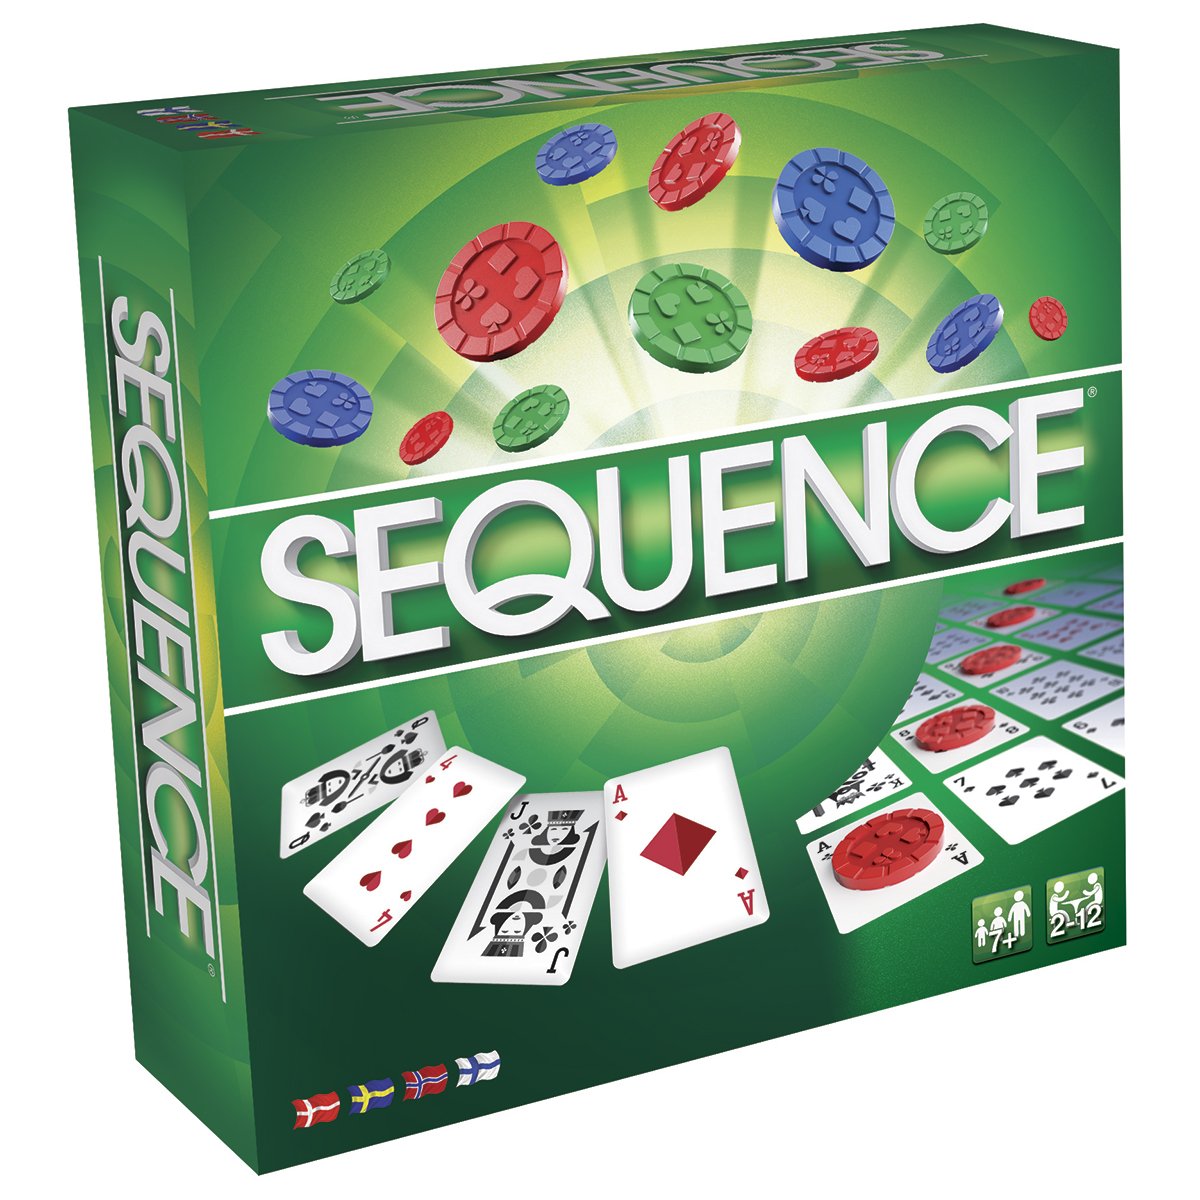 Sequence - The Board Game (GOL7002)